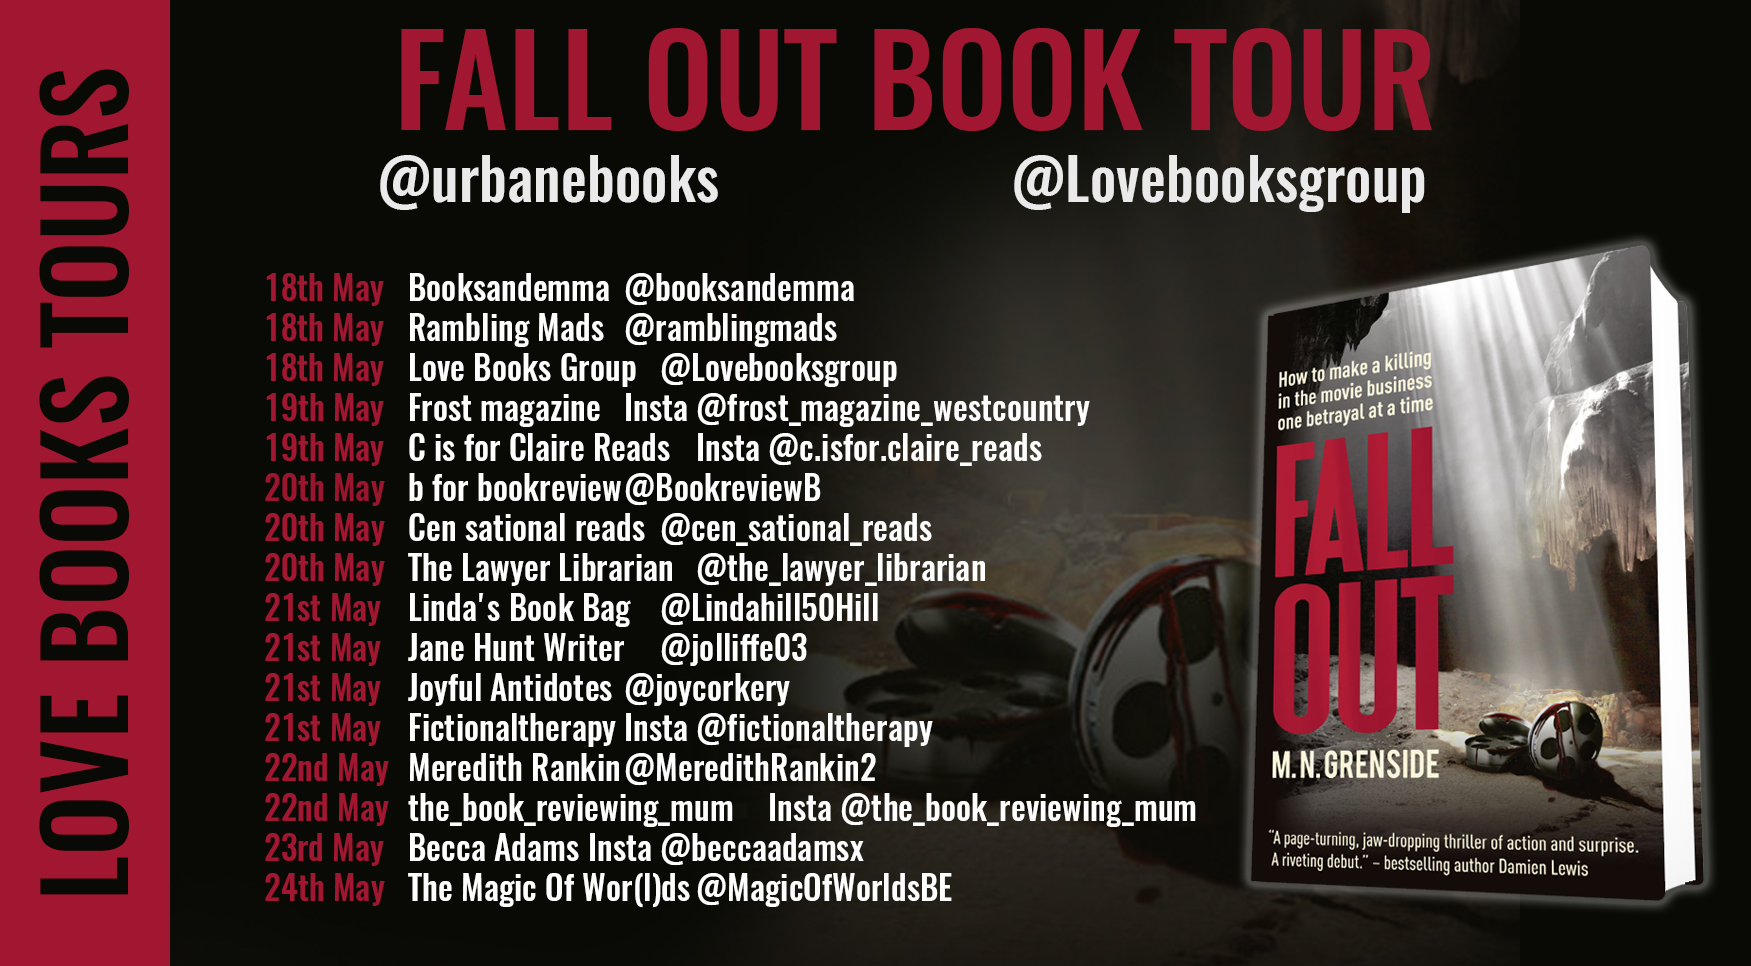 Blog tour poster for Fall Out by Mark Grenside